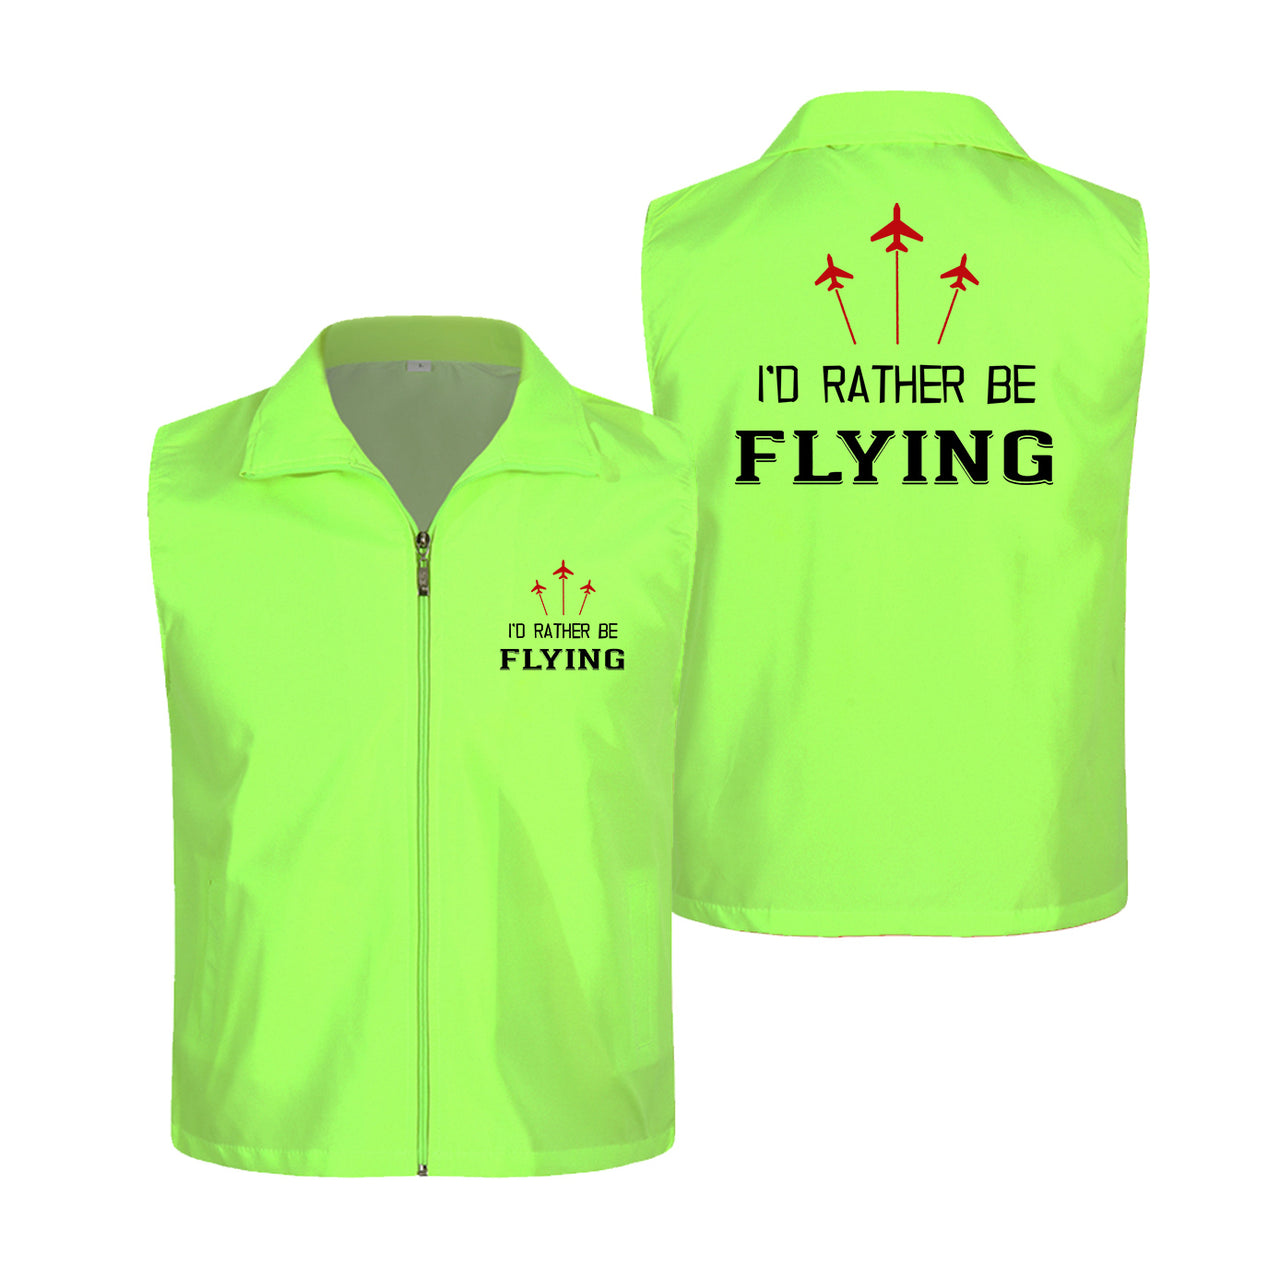 I'D Rather Be Flying Designed Thin Style Vests